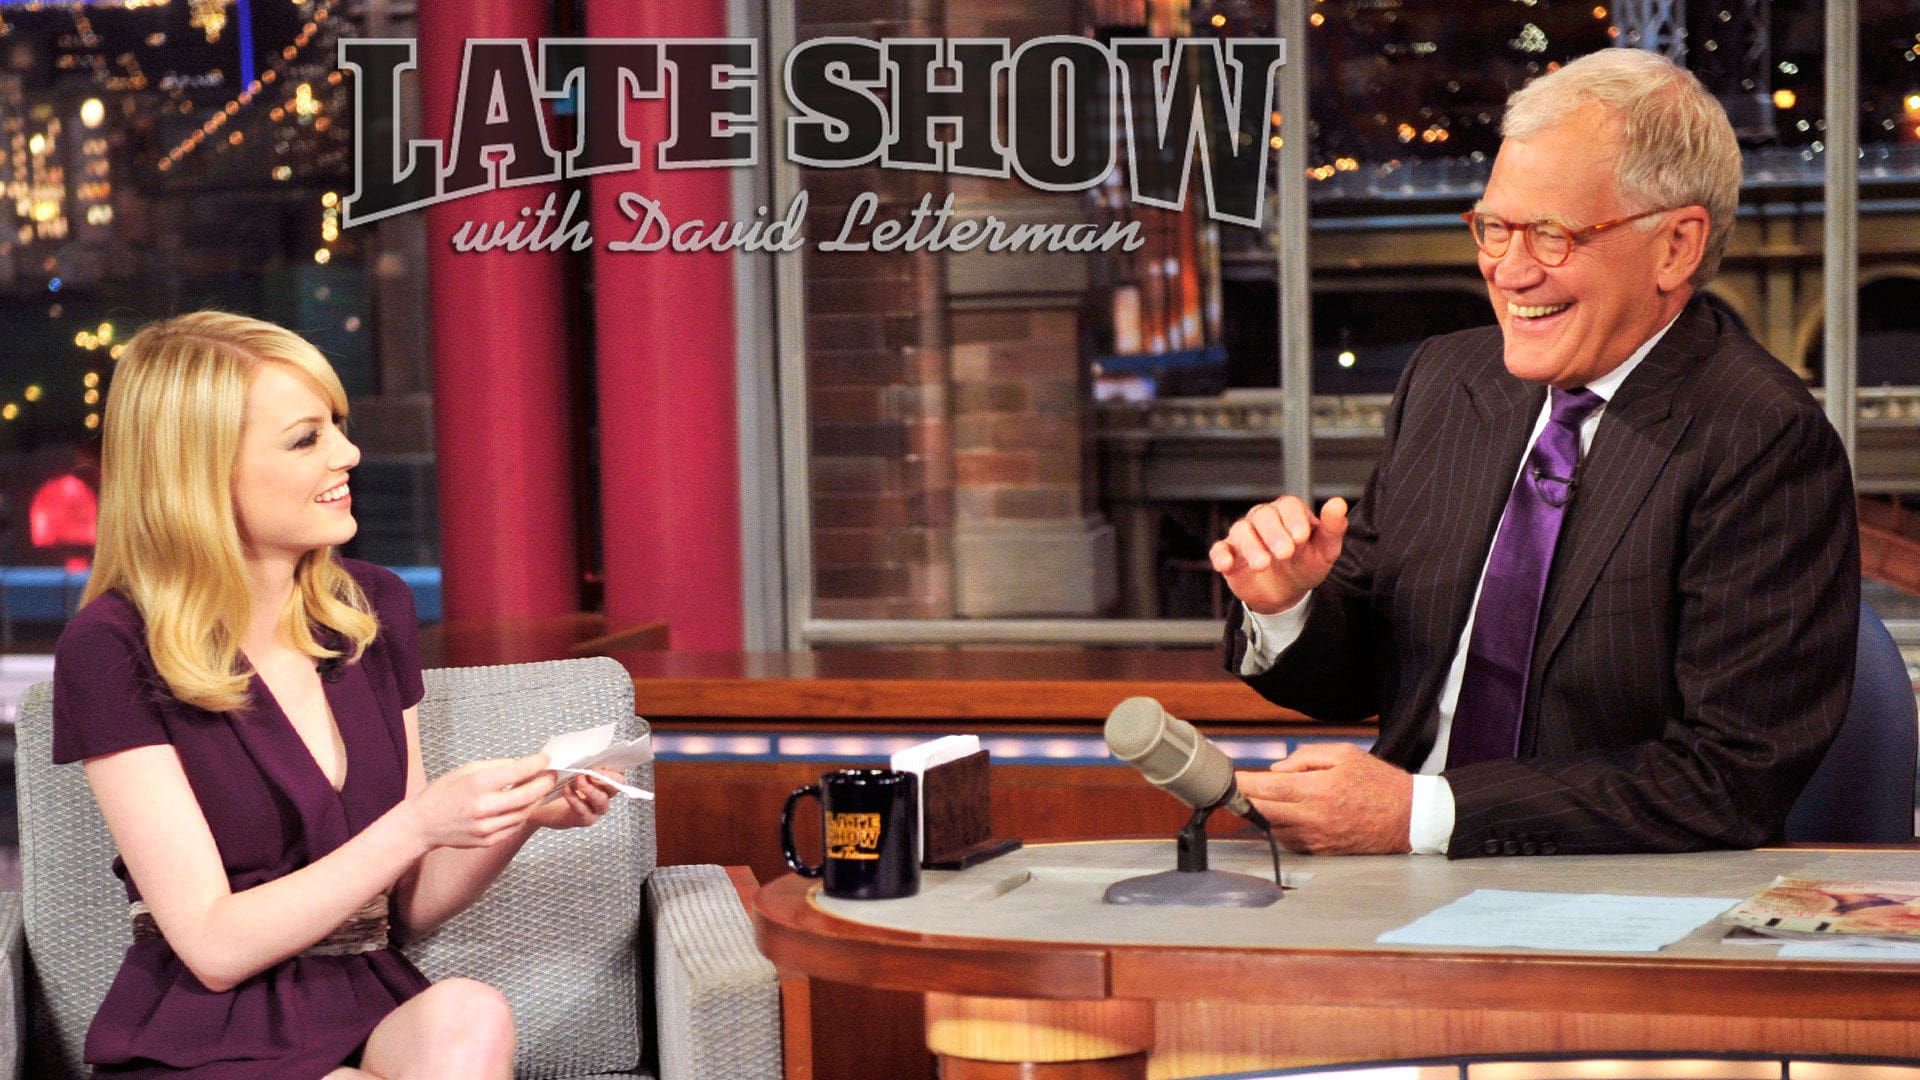 Late Show with David Letterman - Season 22 Episode 135